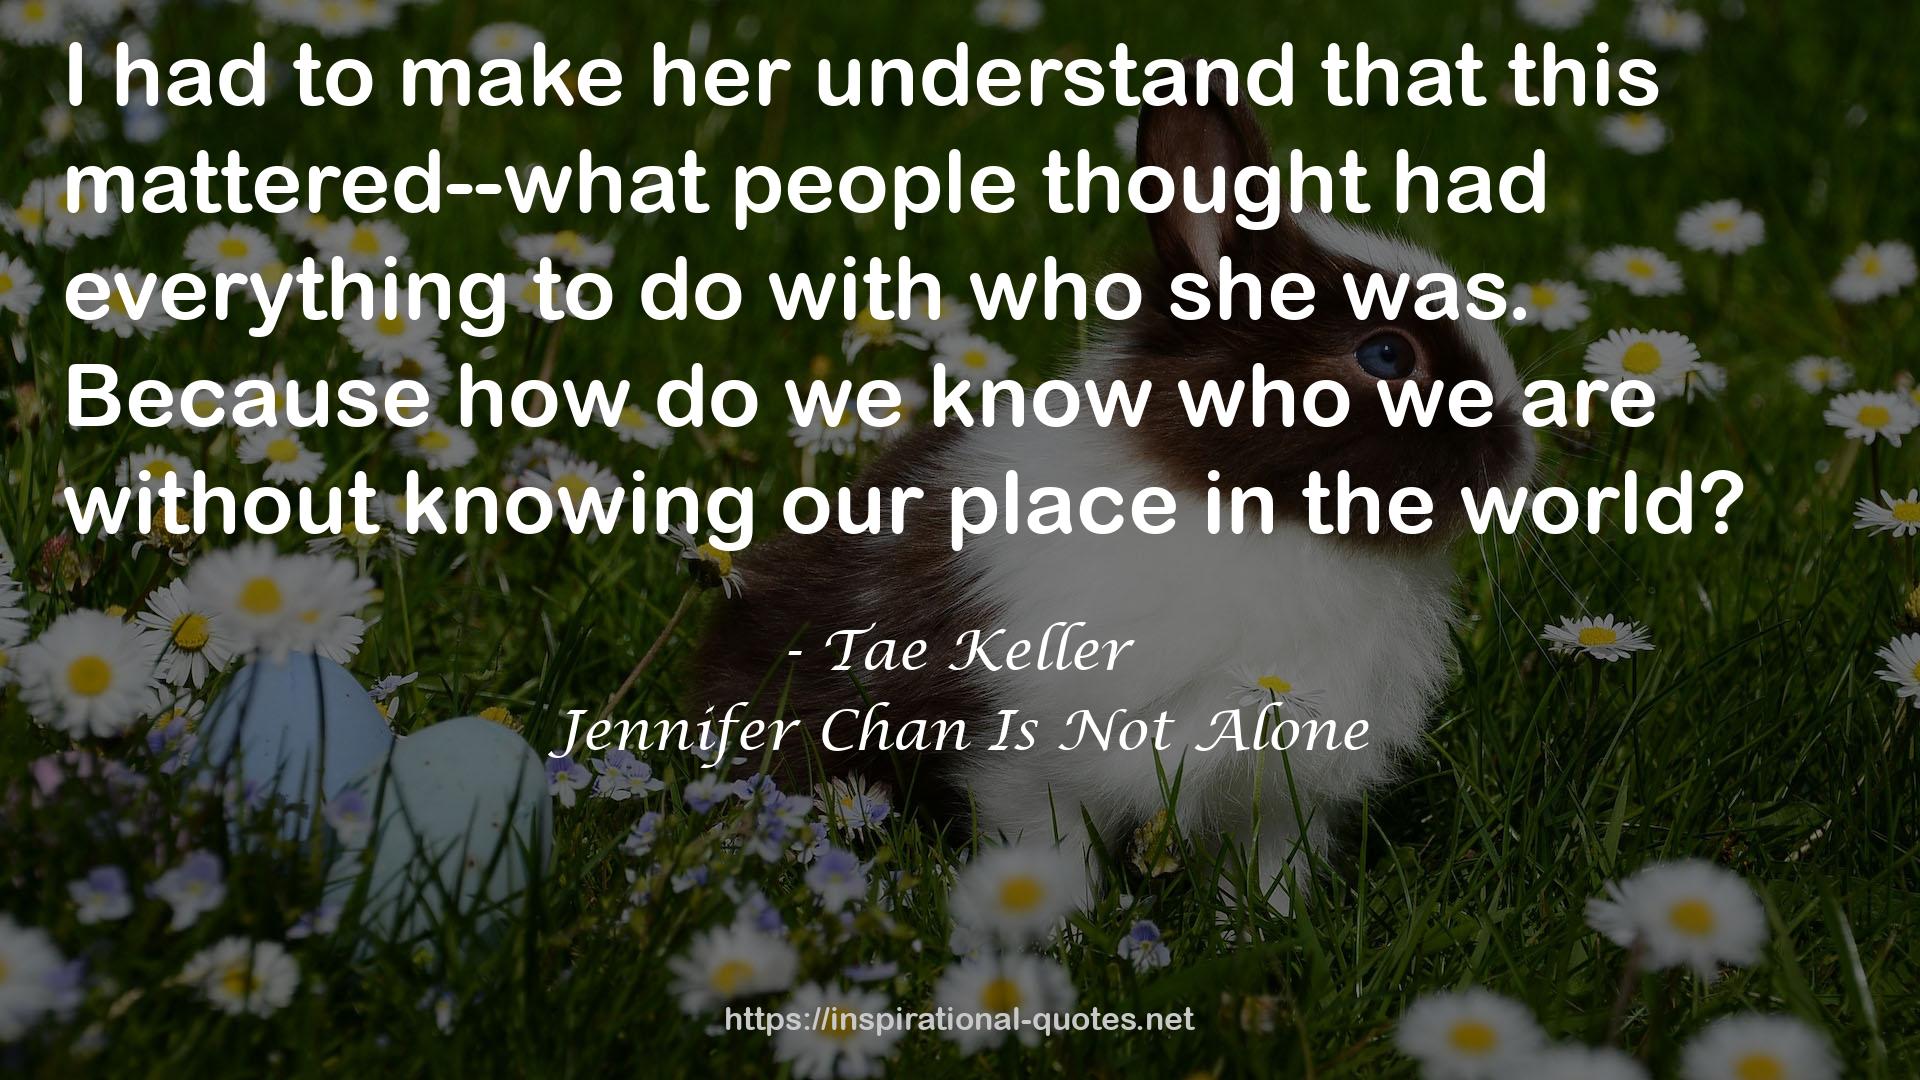 Jennifer Chan Is Not Alone QUOTES